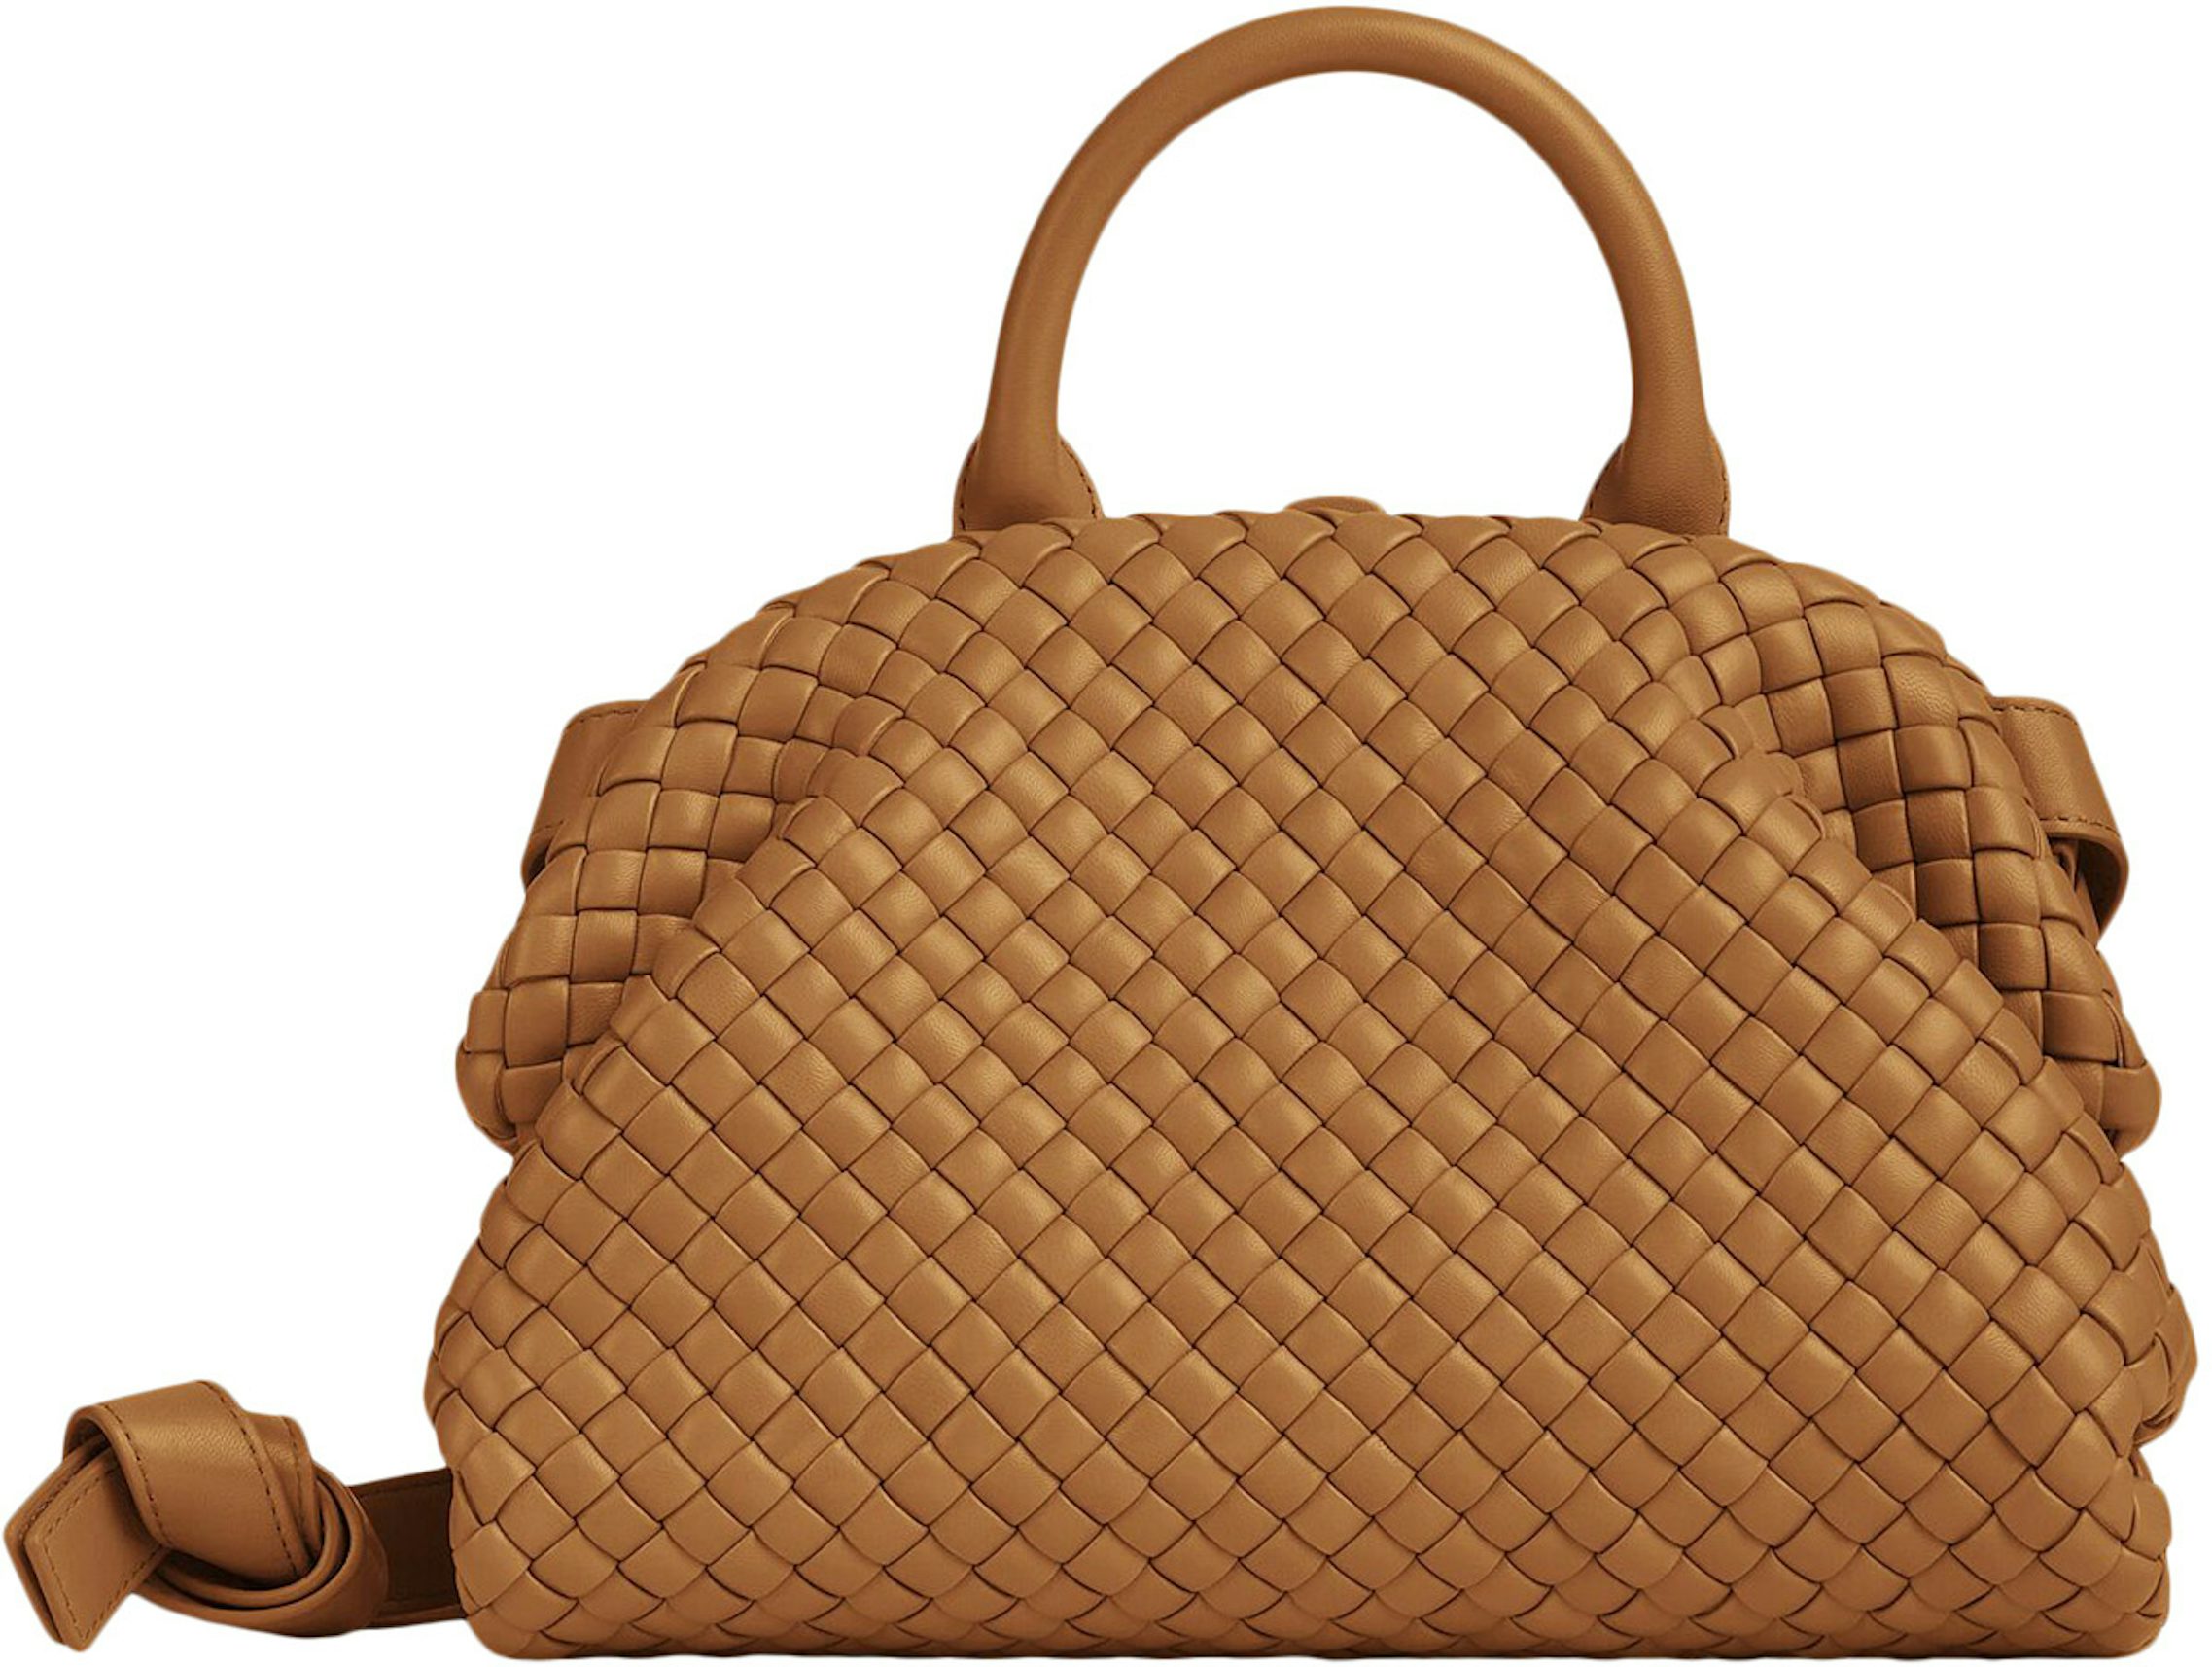 The Best Bottega Veneta Handbags (And Their Histories) To Shop Now, From  The Sardine To The Jodie